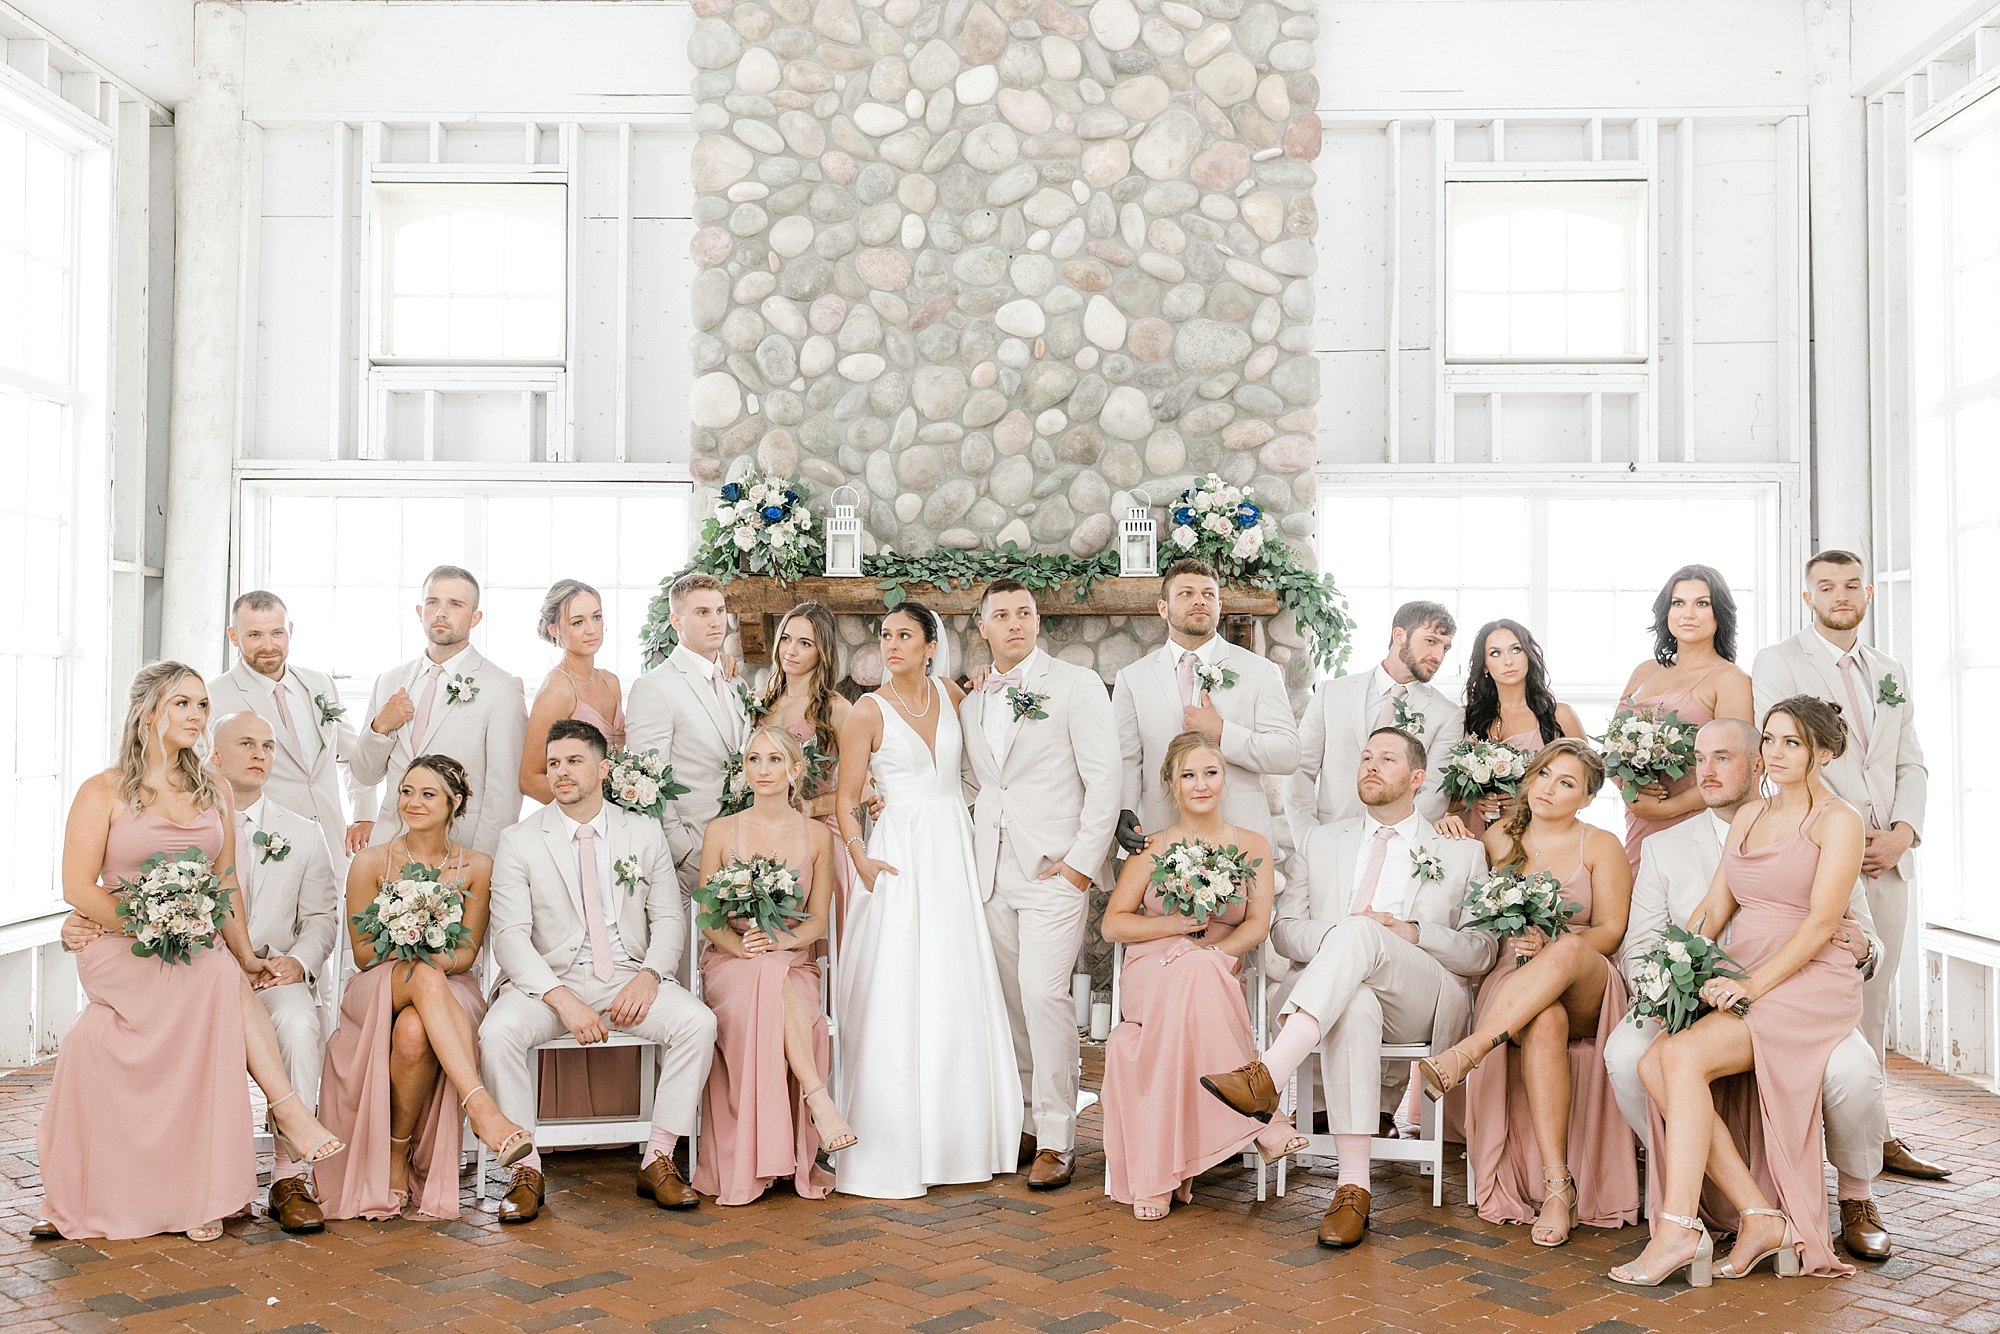 bride and groom stand with wedding party in ivory suits and dusty pink gowns